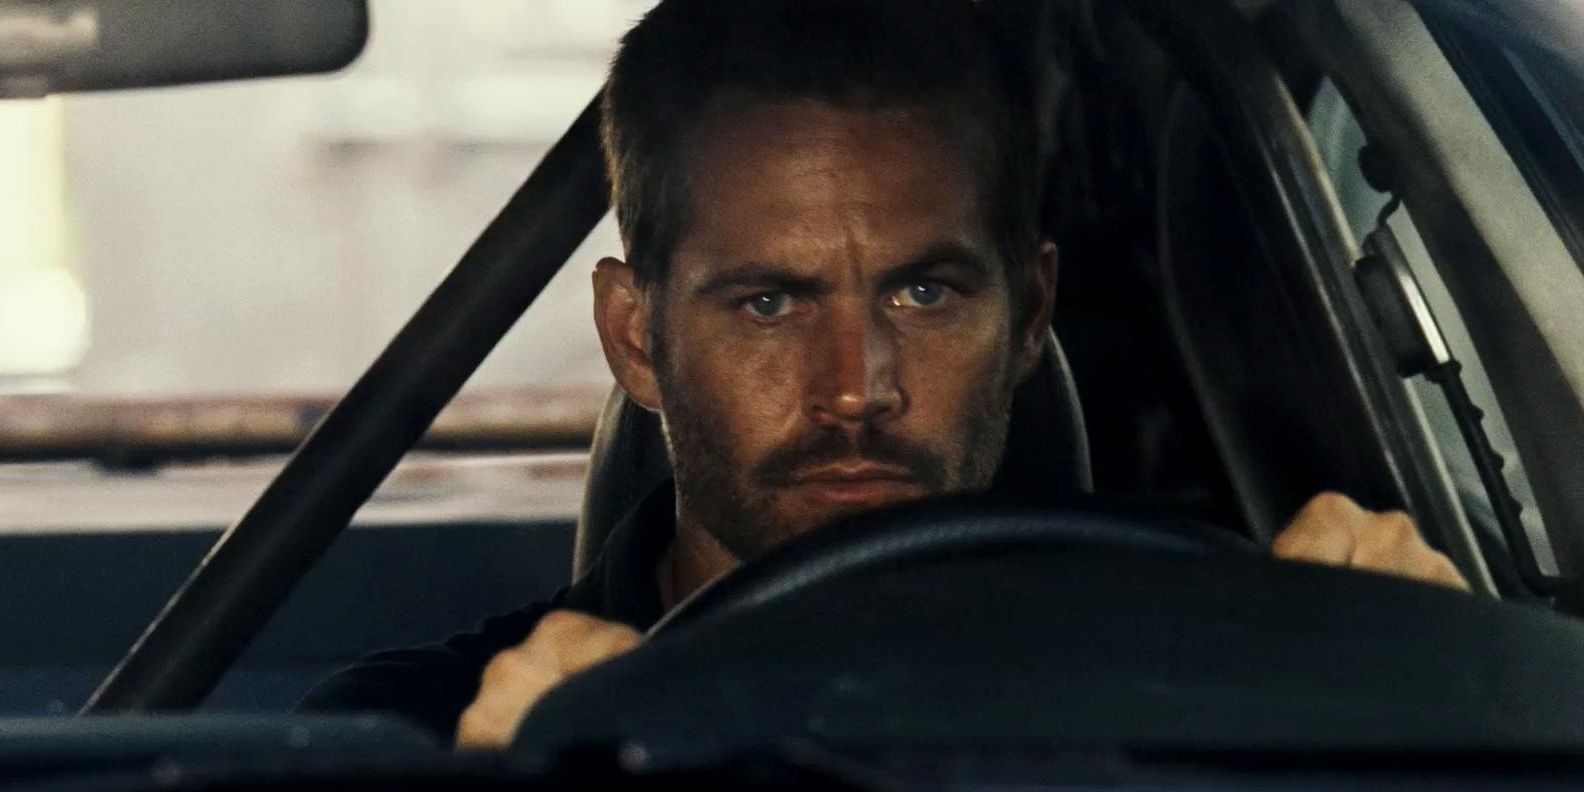 Brian O'Conner driving his car in Fast and Furious 6 